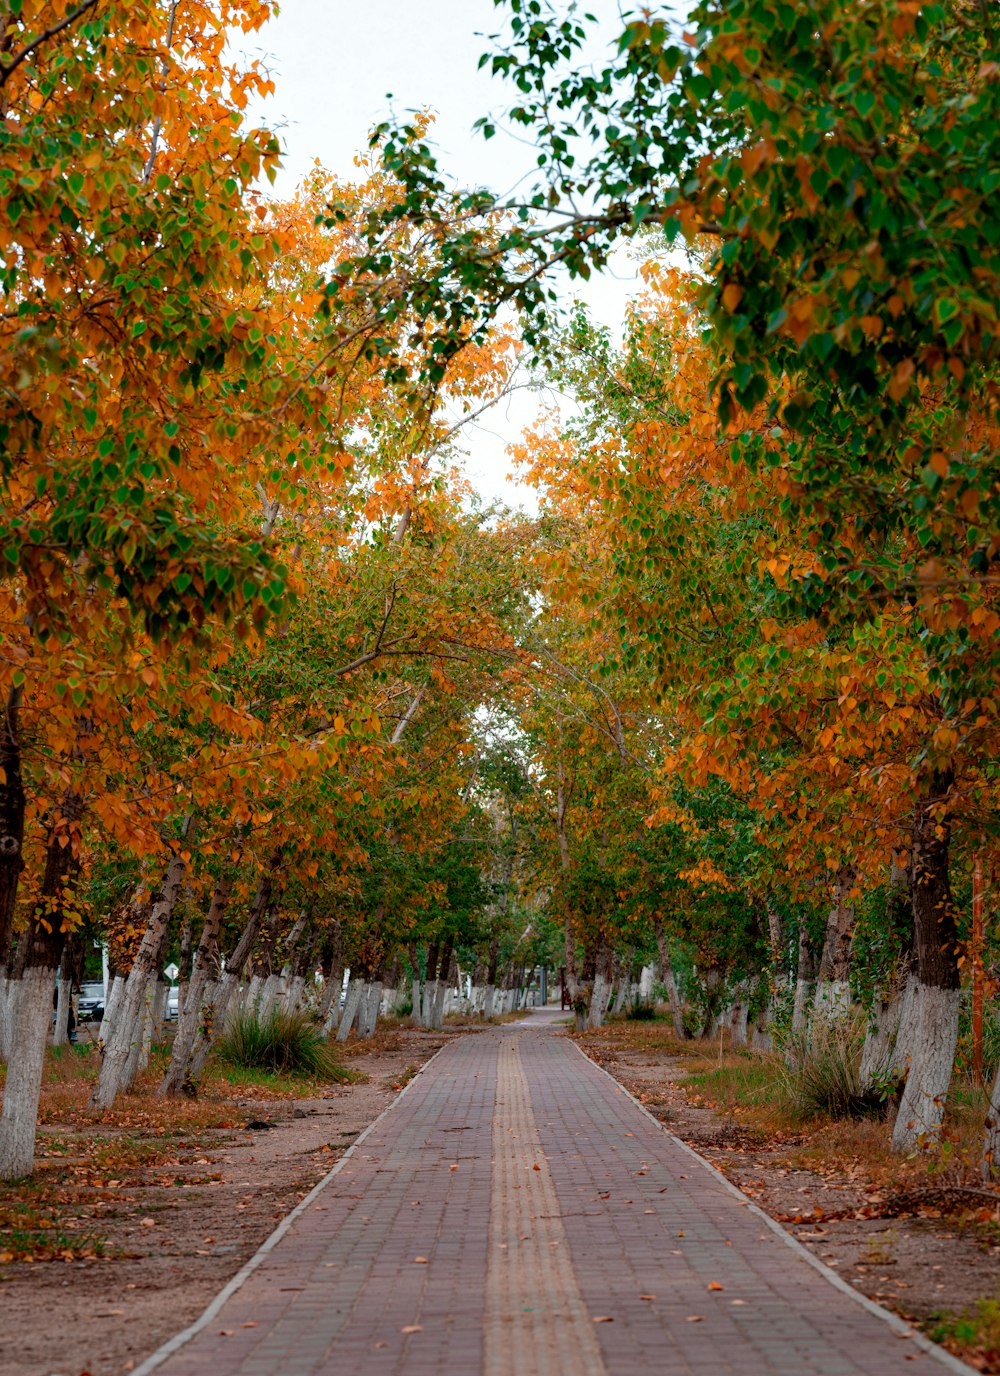 a brick road surrounded by trees with orange leaves